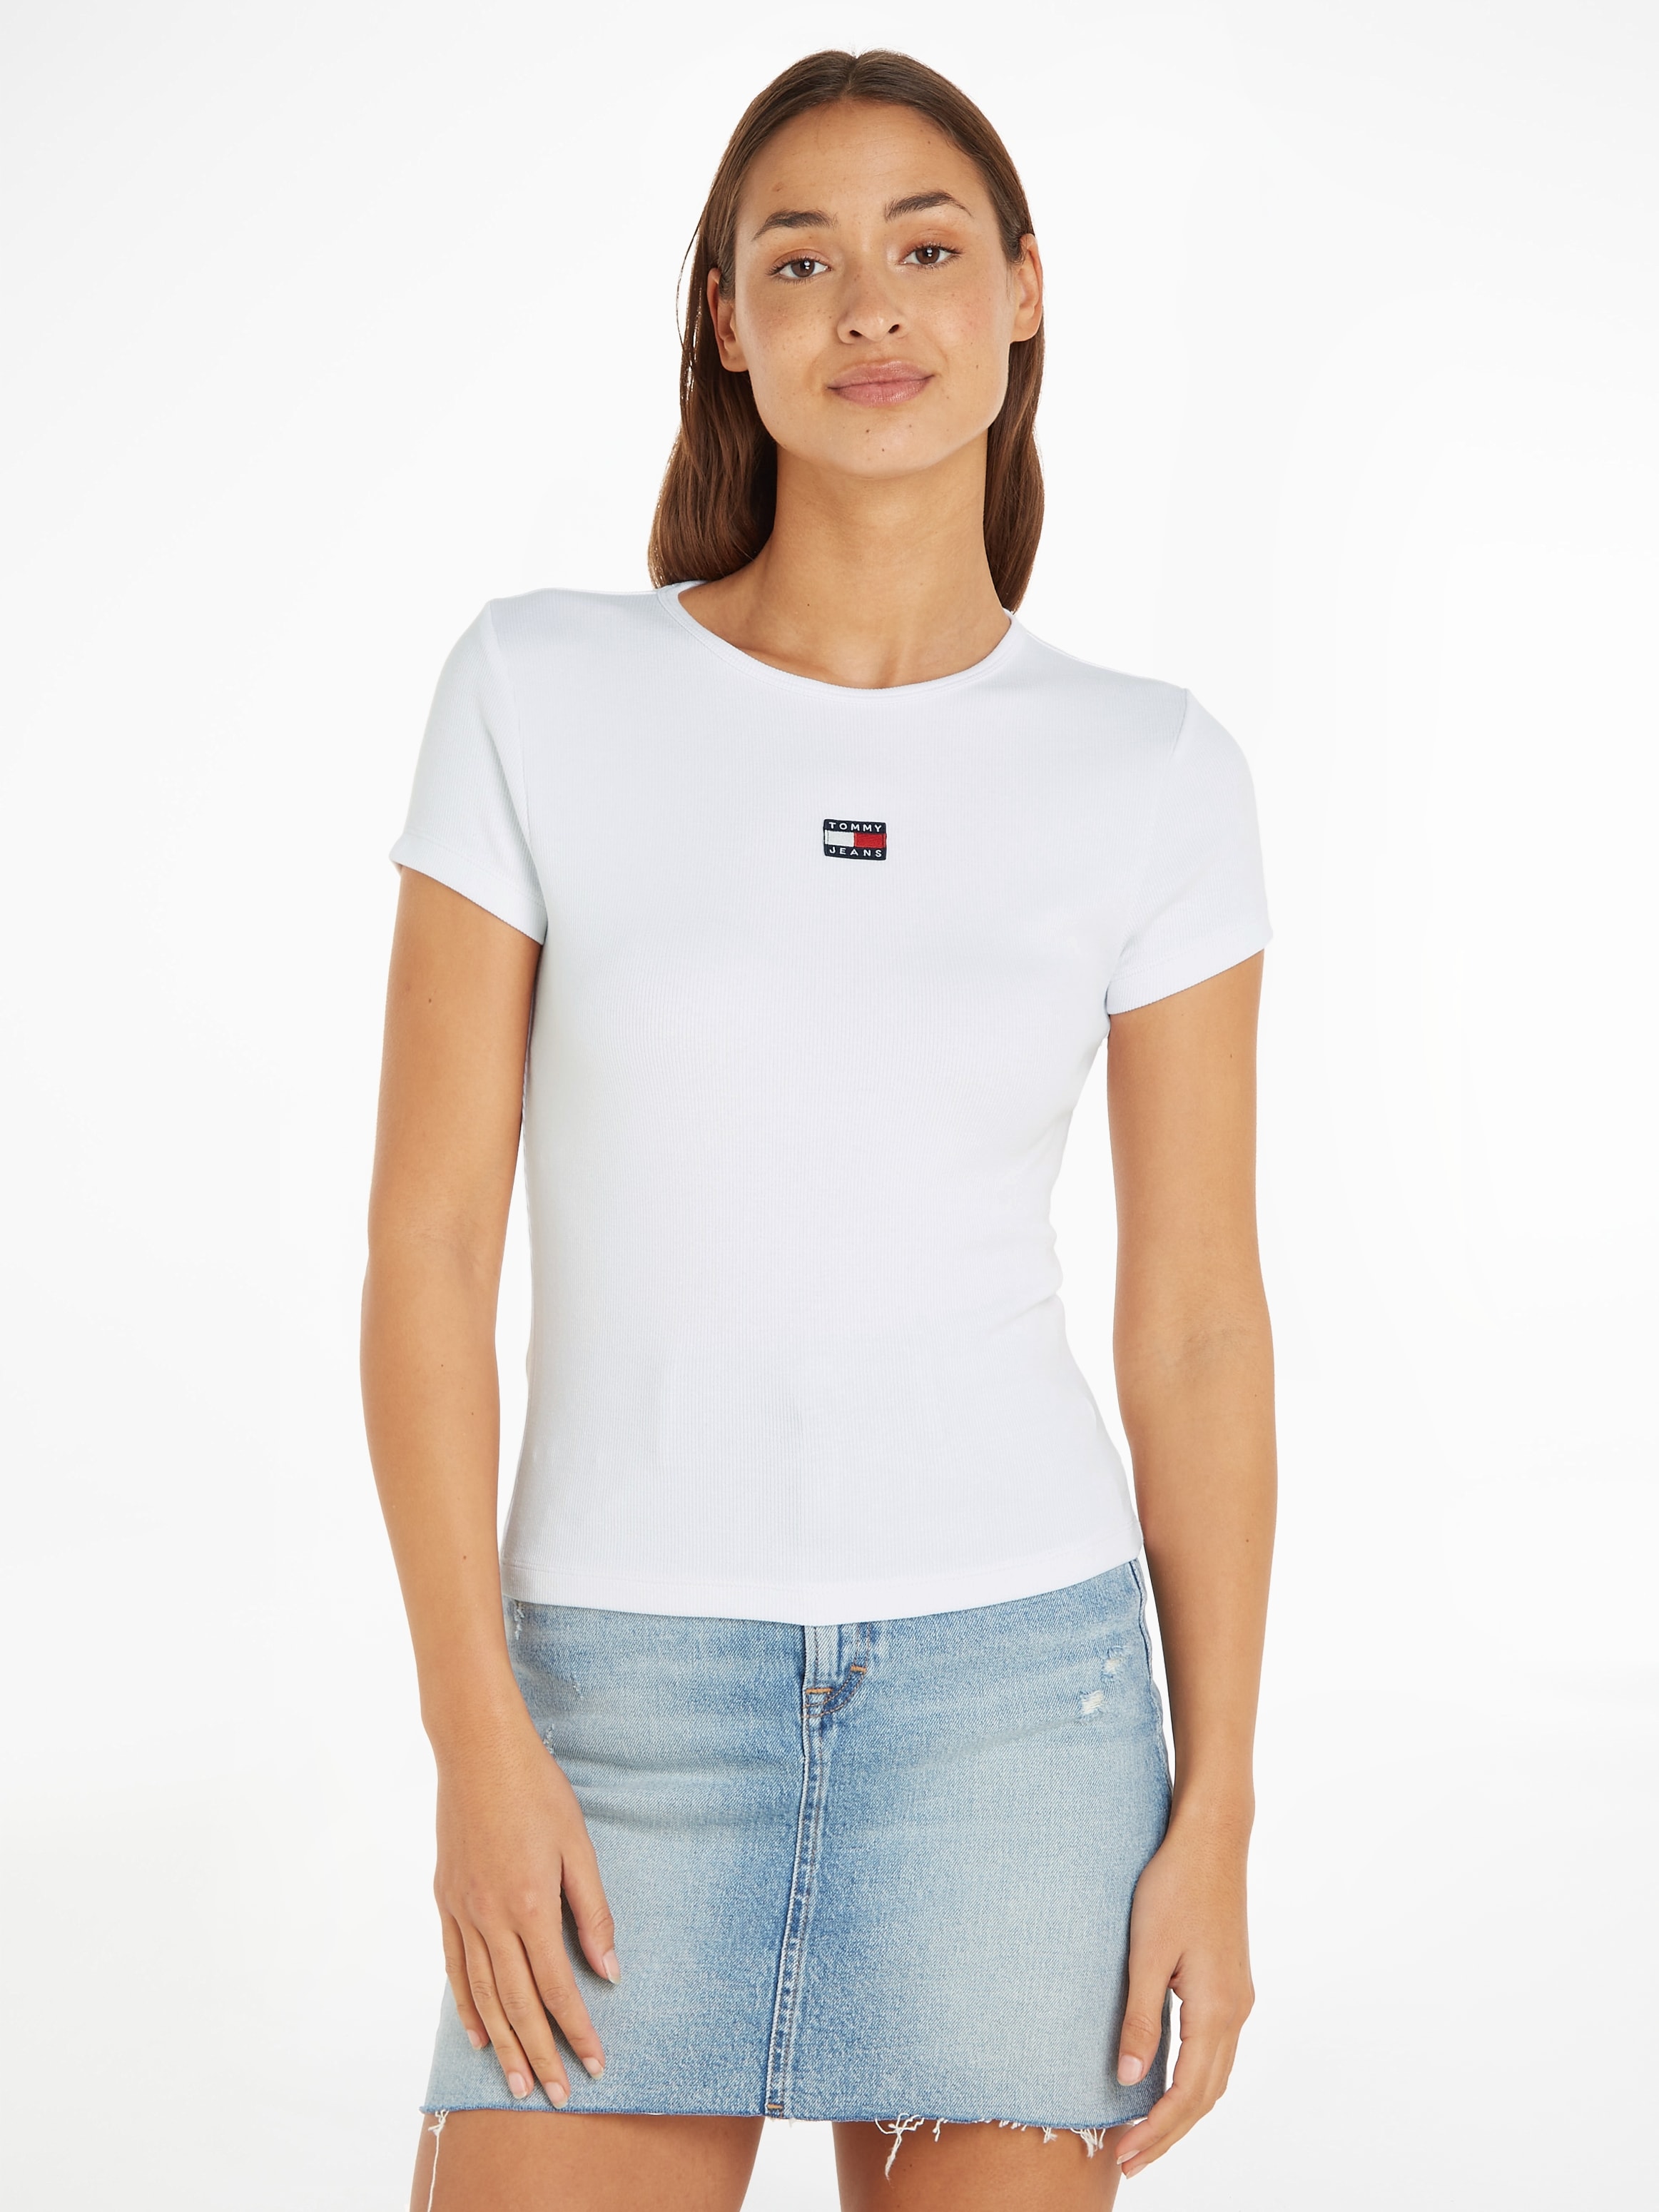 Tommy Jeans BADGE TEE«, T-Shirt RIB mit »TJW Logobadge BBY bei XS ♕